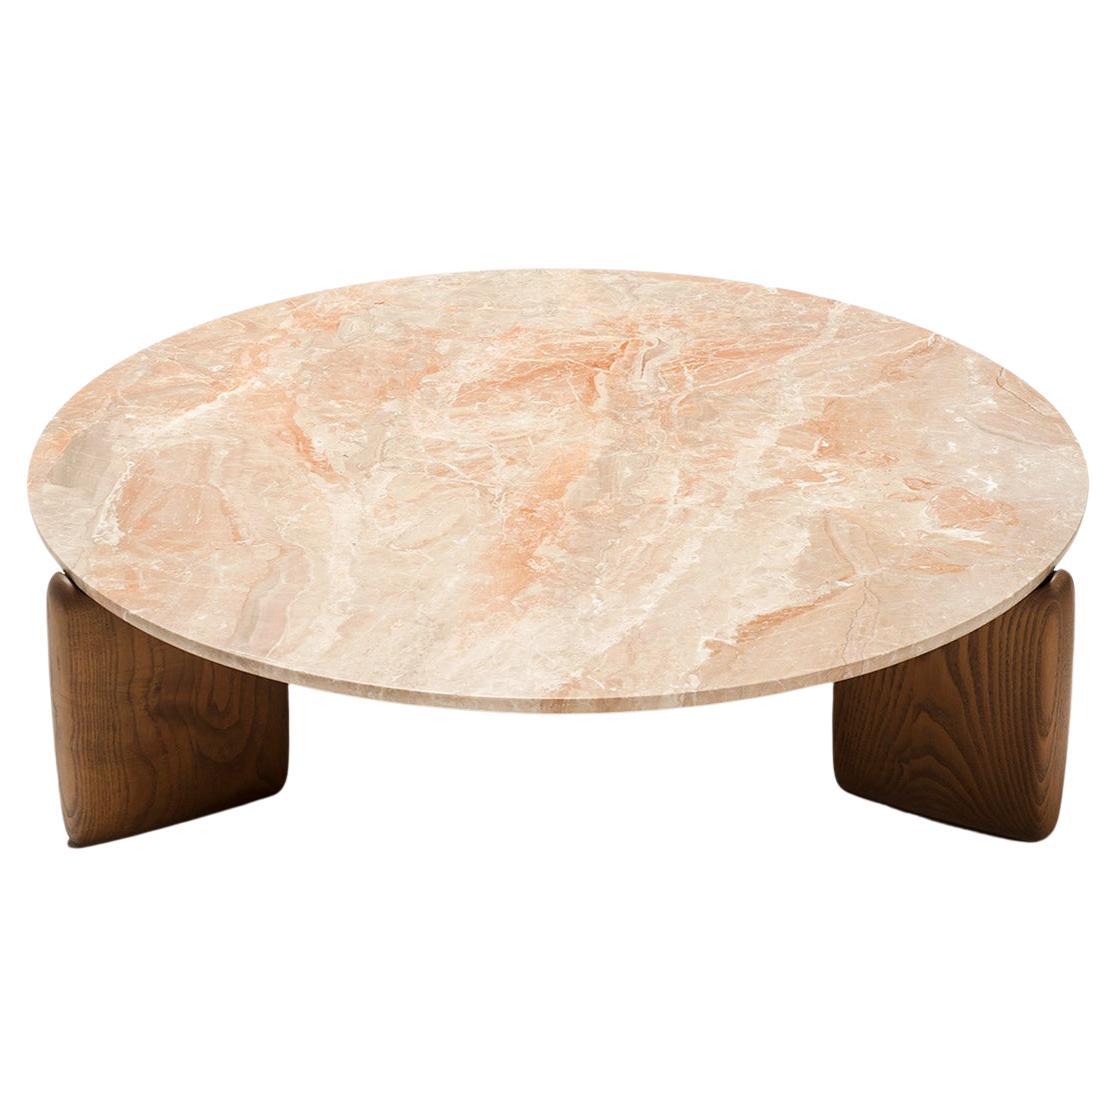 Tacchini Kanji Marble & Wood Table Designed by Monica Förster